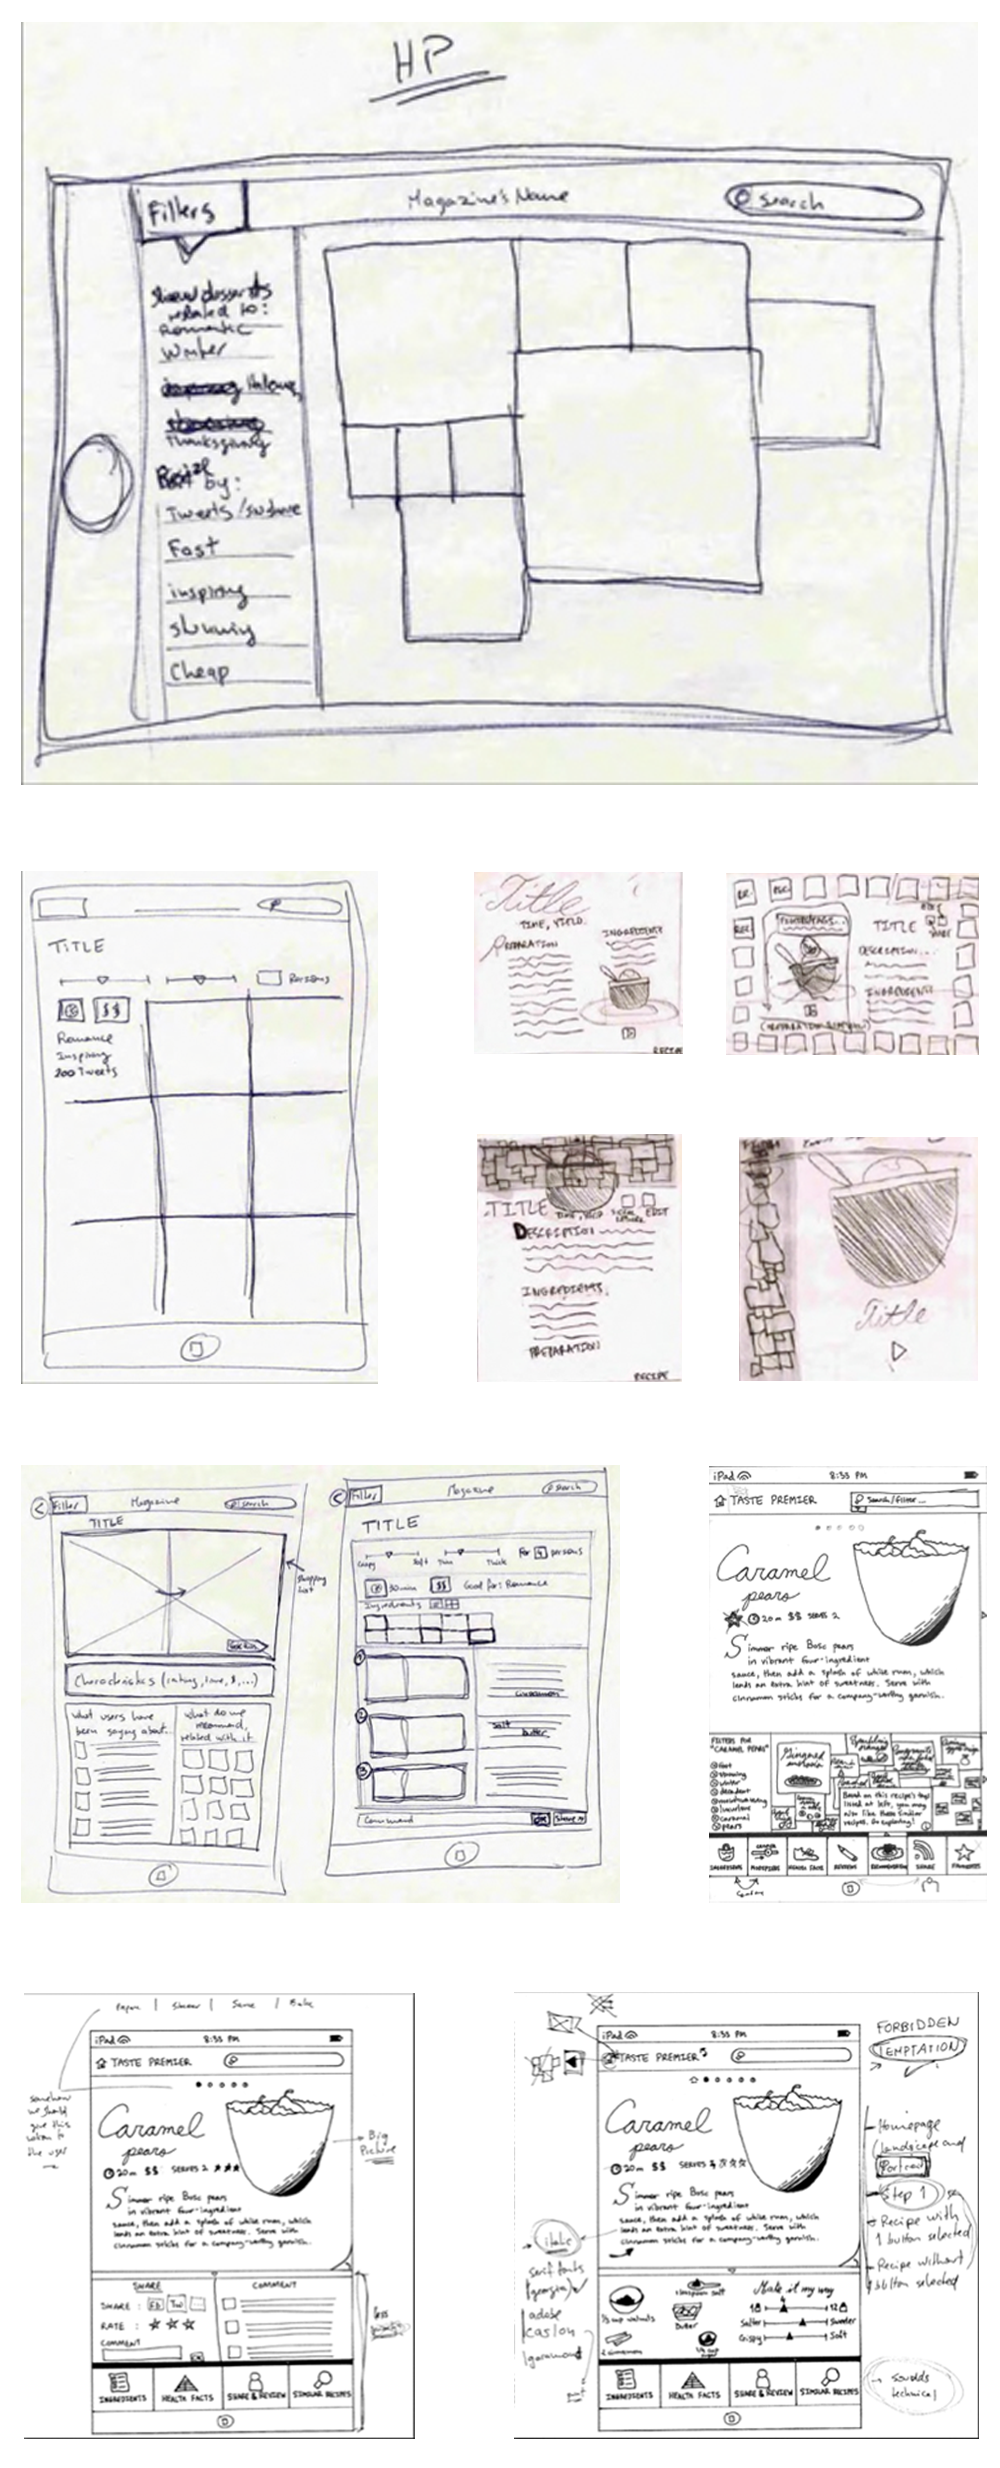 A progression of sketches rendering the interface of the app